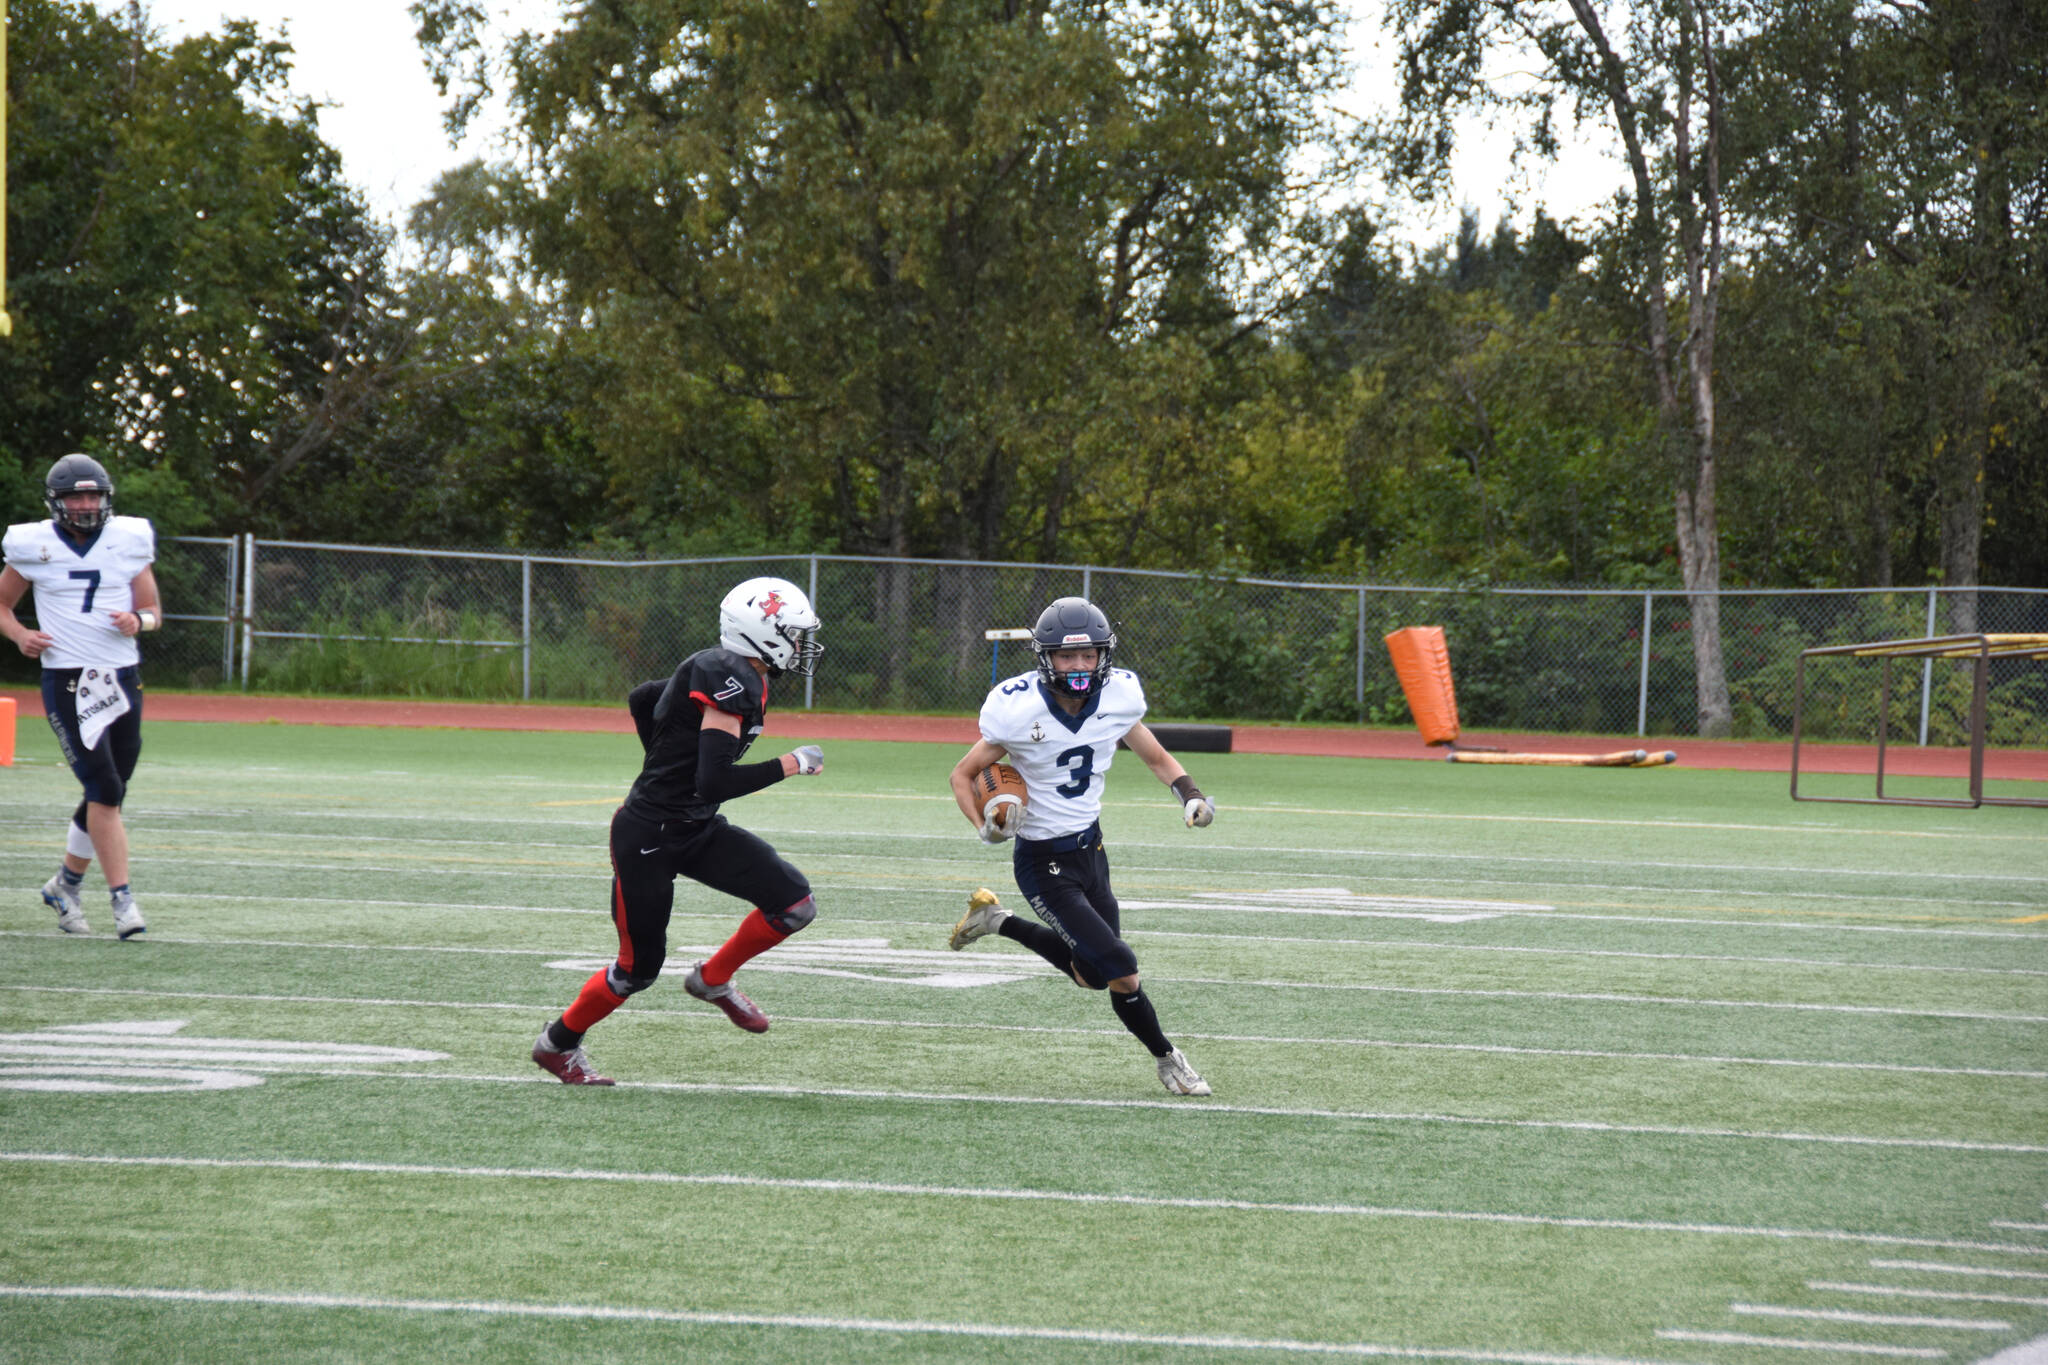 Wide receiver Jonah Martin carries the ball upfield on Saturday, Sep. 3, at the Homer High School Field in Homer, Alaska. (Photo by Charlie Menke/ Homer News)